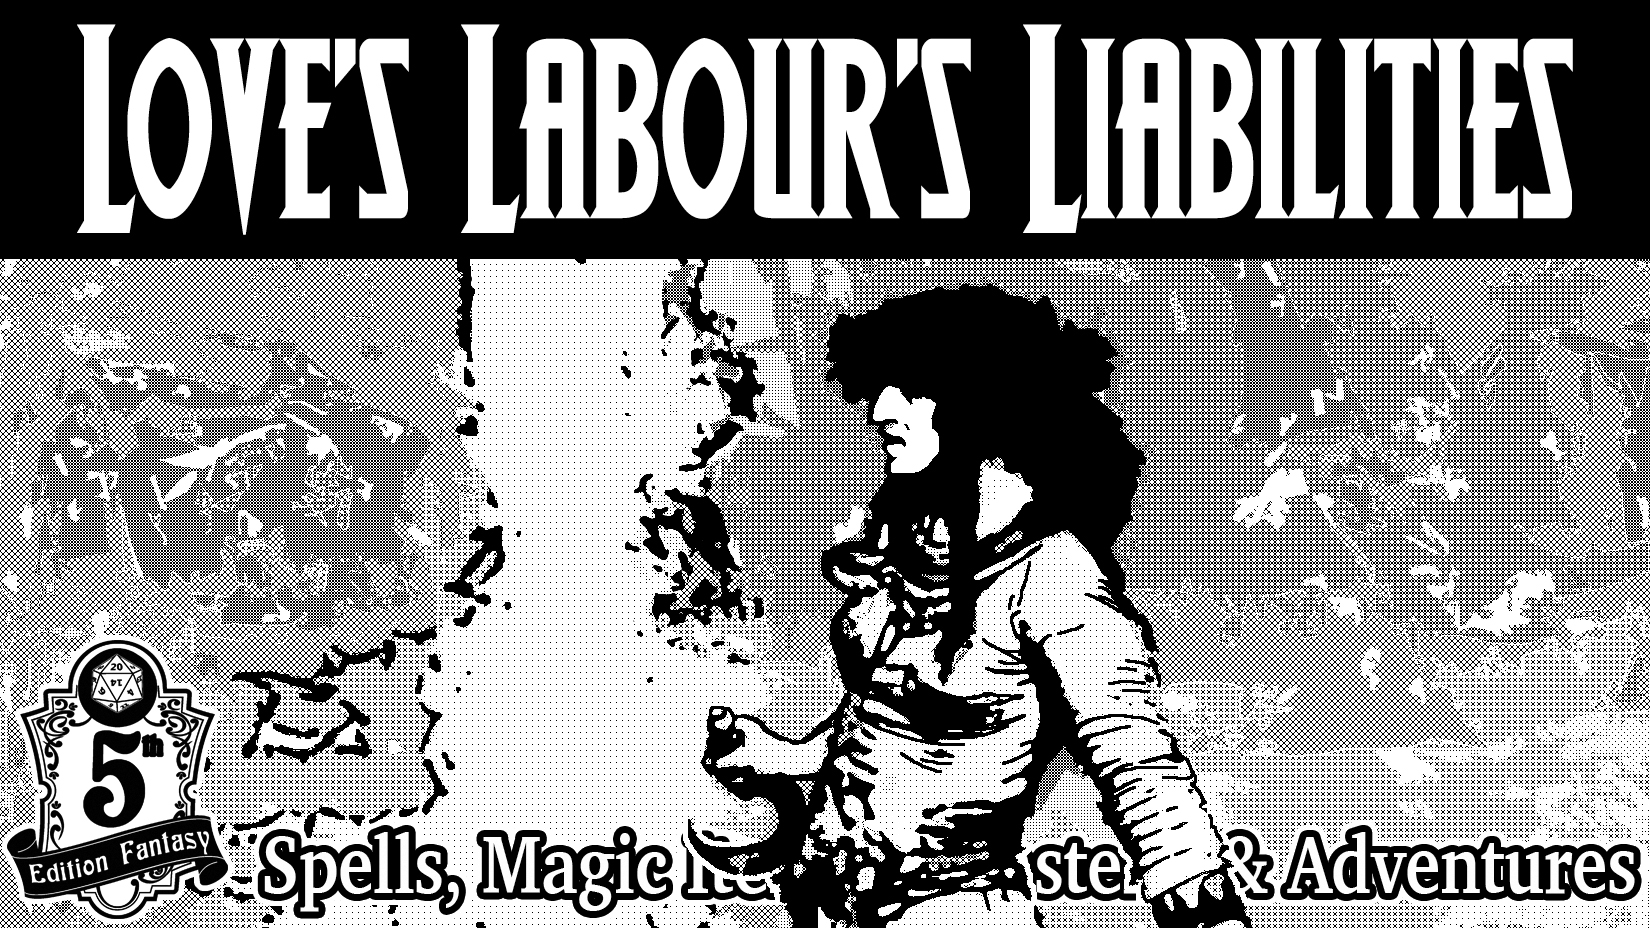 COVER, FRONT - Love's Labour's Liabilities w Credits CROPPED Second - 300 dpi.jpg